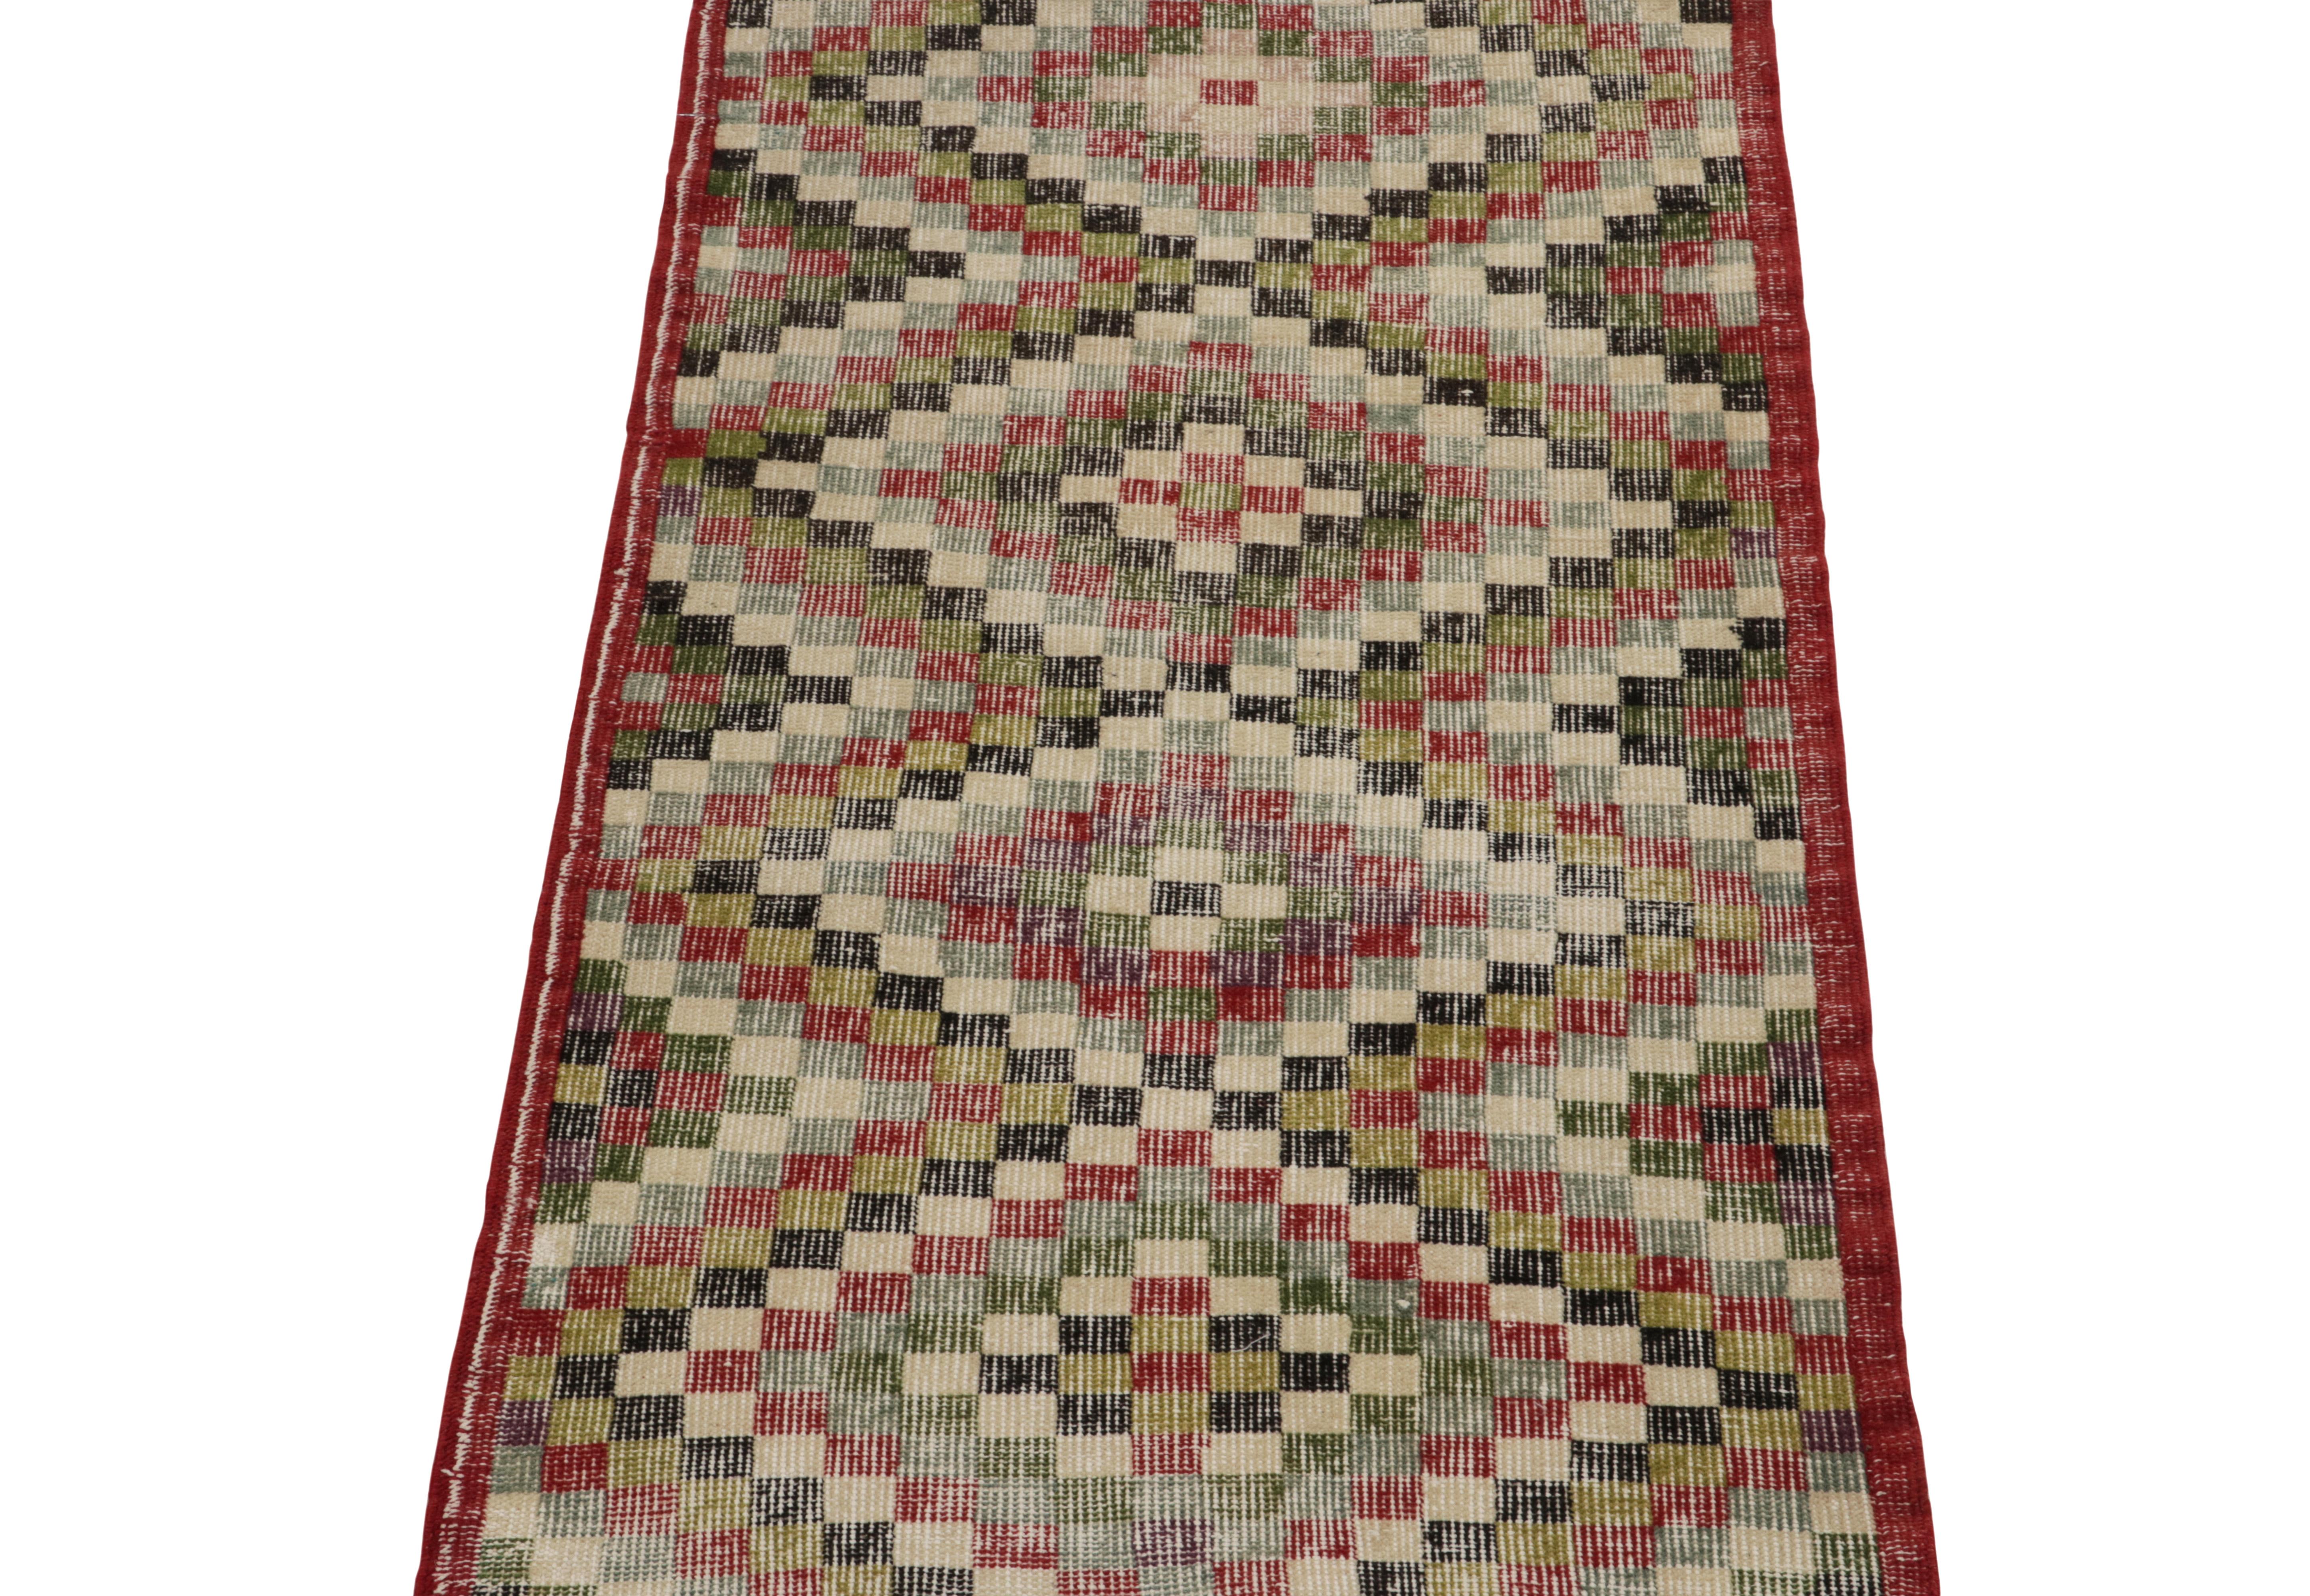 A 2 x 5 vintage rug now joining our Mid-Century Pasha collection commemorating the works of bold 1960s ateliers. 

The shabby-chic design enjoys a graceful multicolor geometric pattern for exceptional pagination in such exciting colorplay.